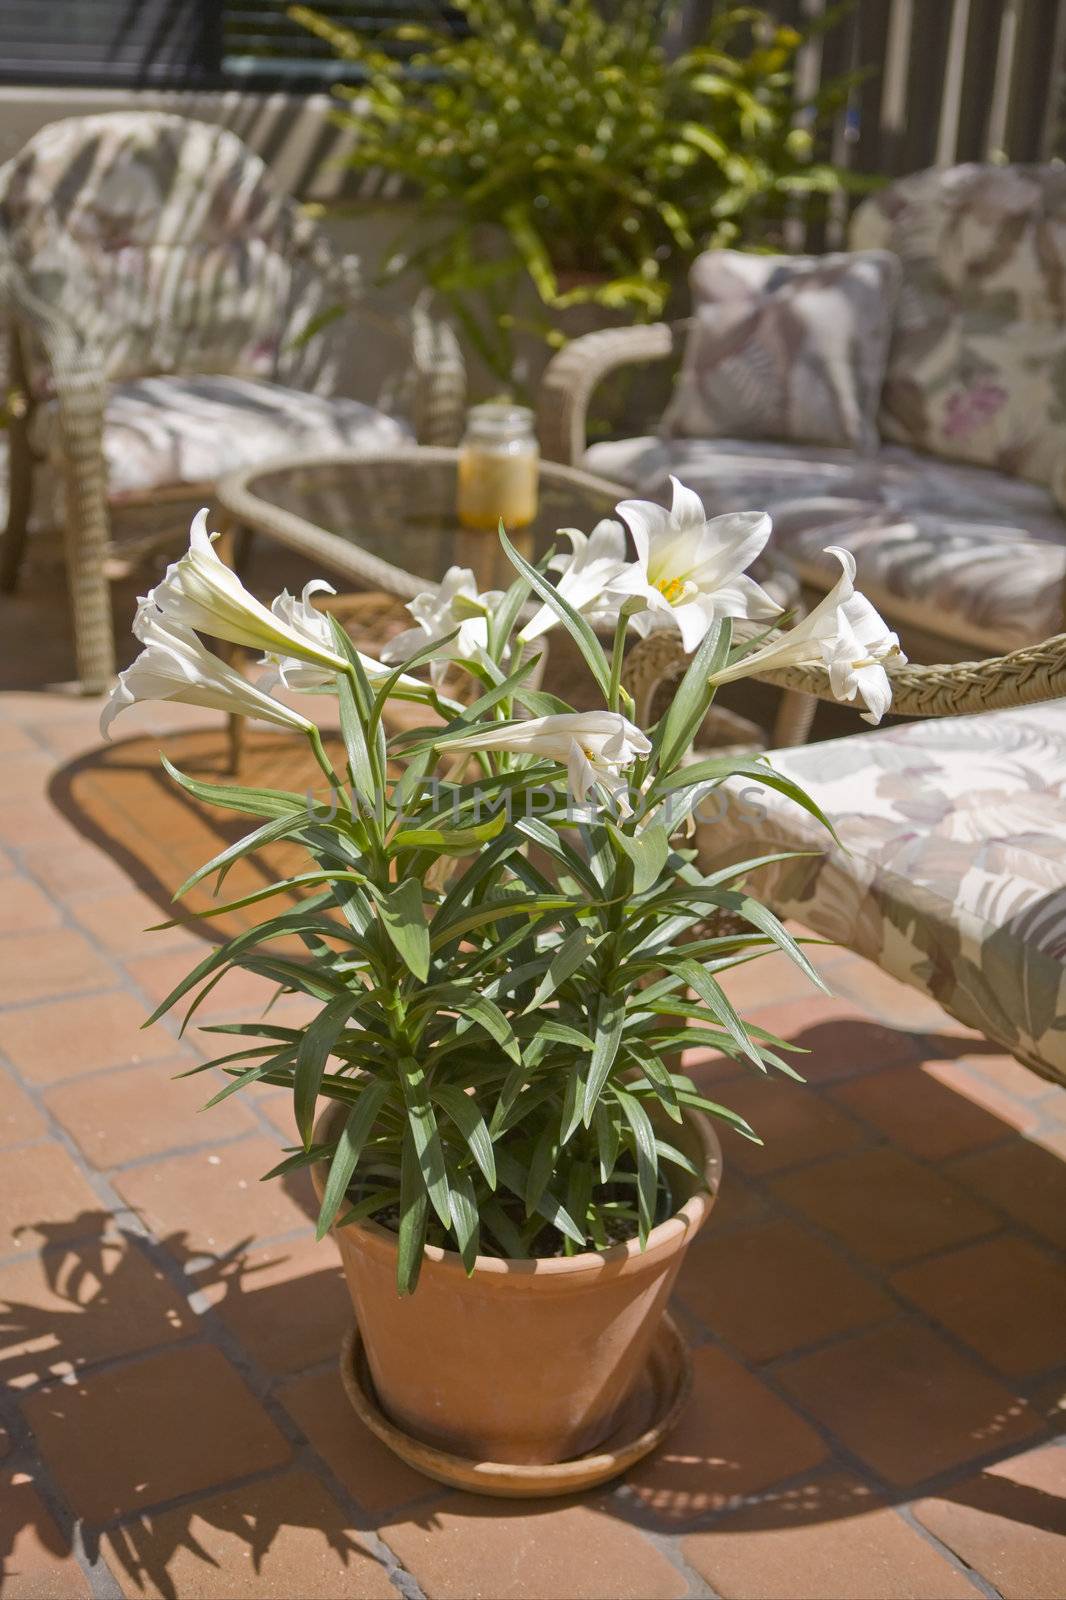 Potted Lily on an Outdoor Patio in California